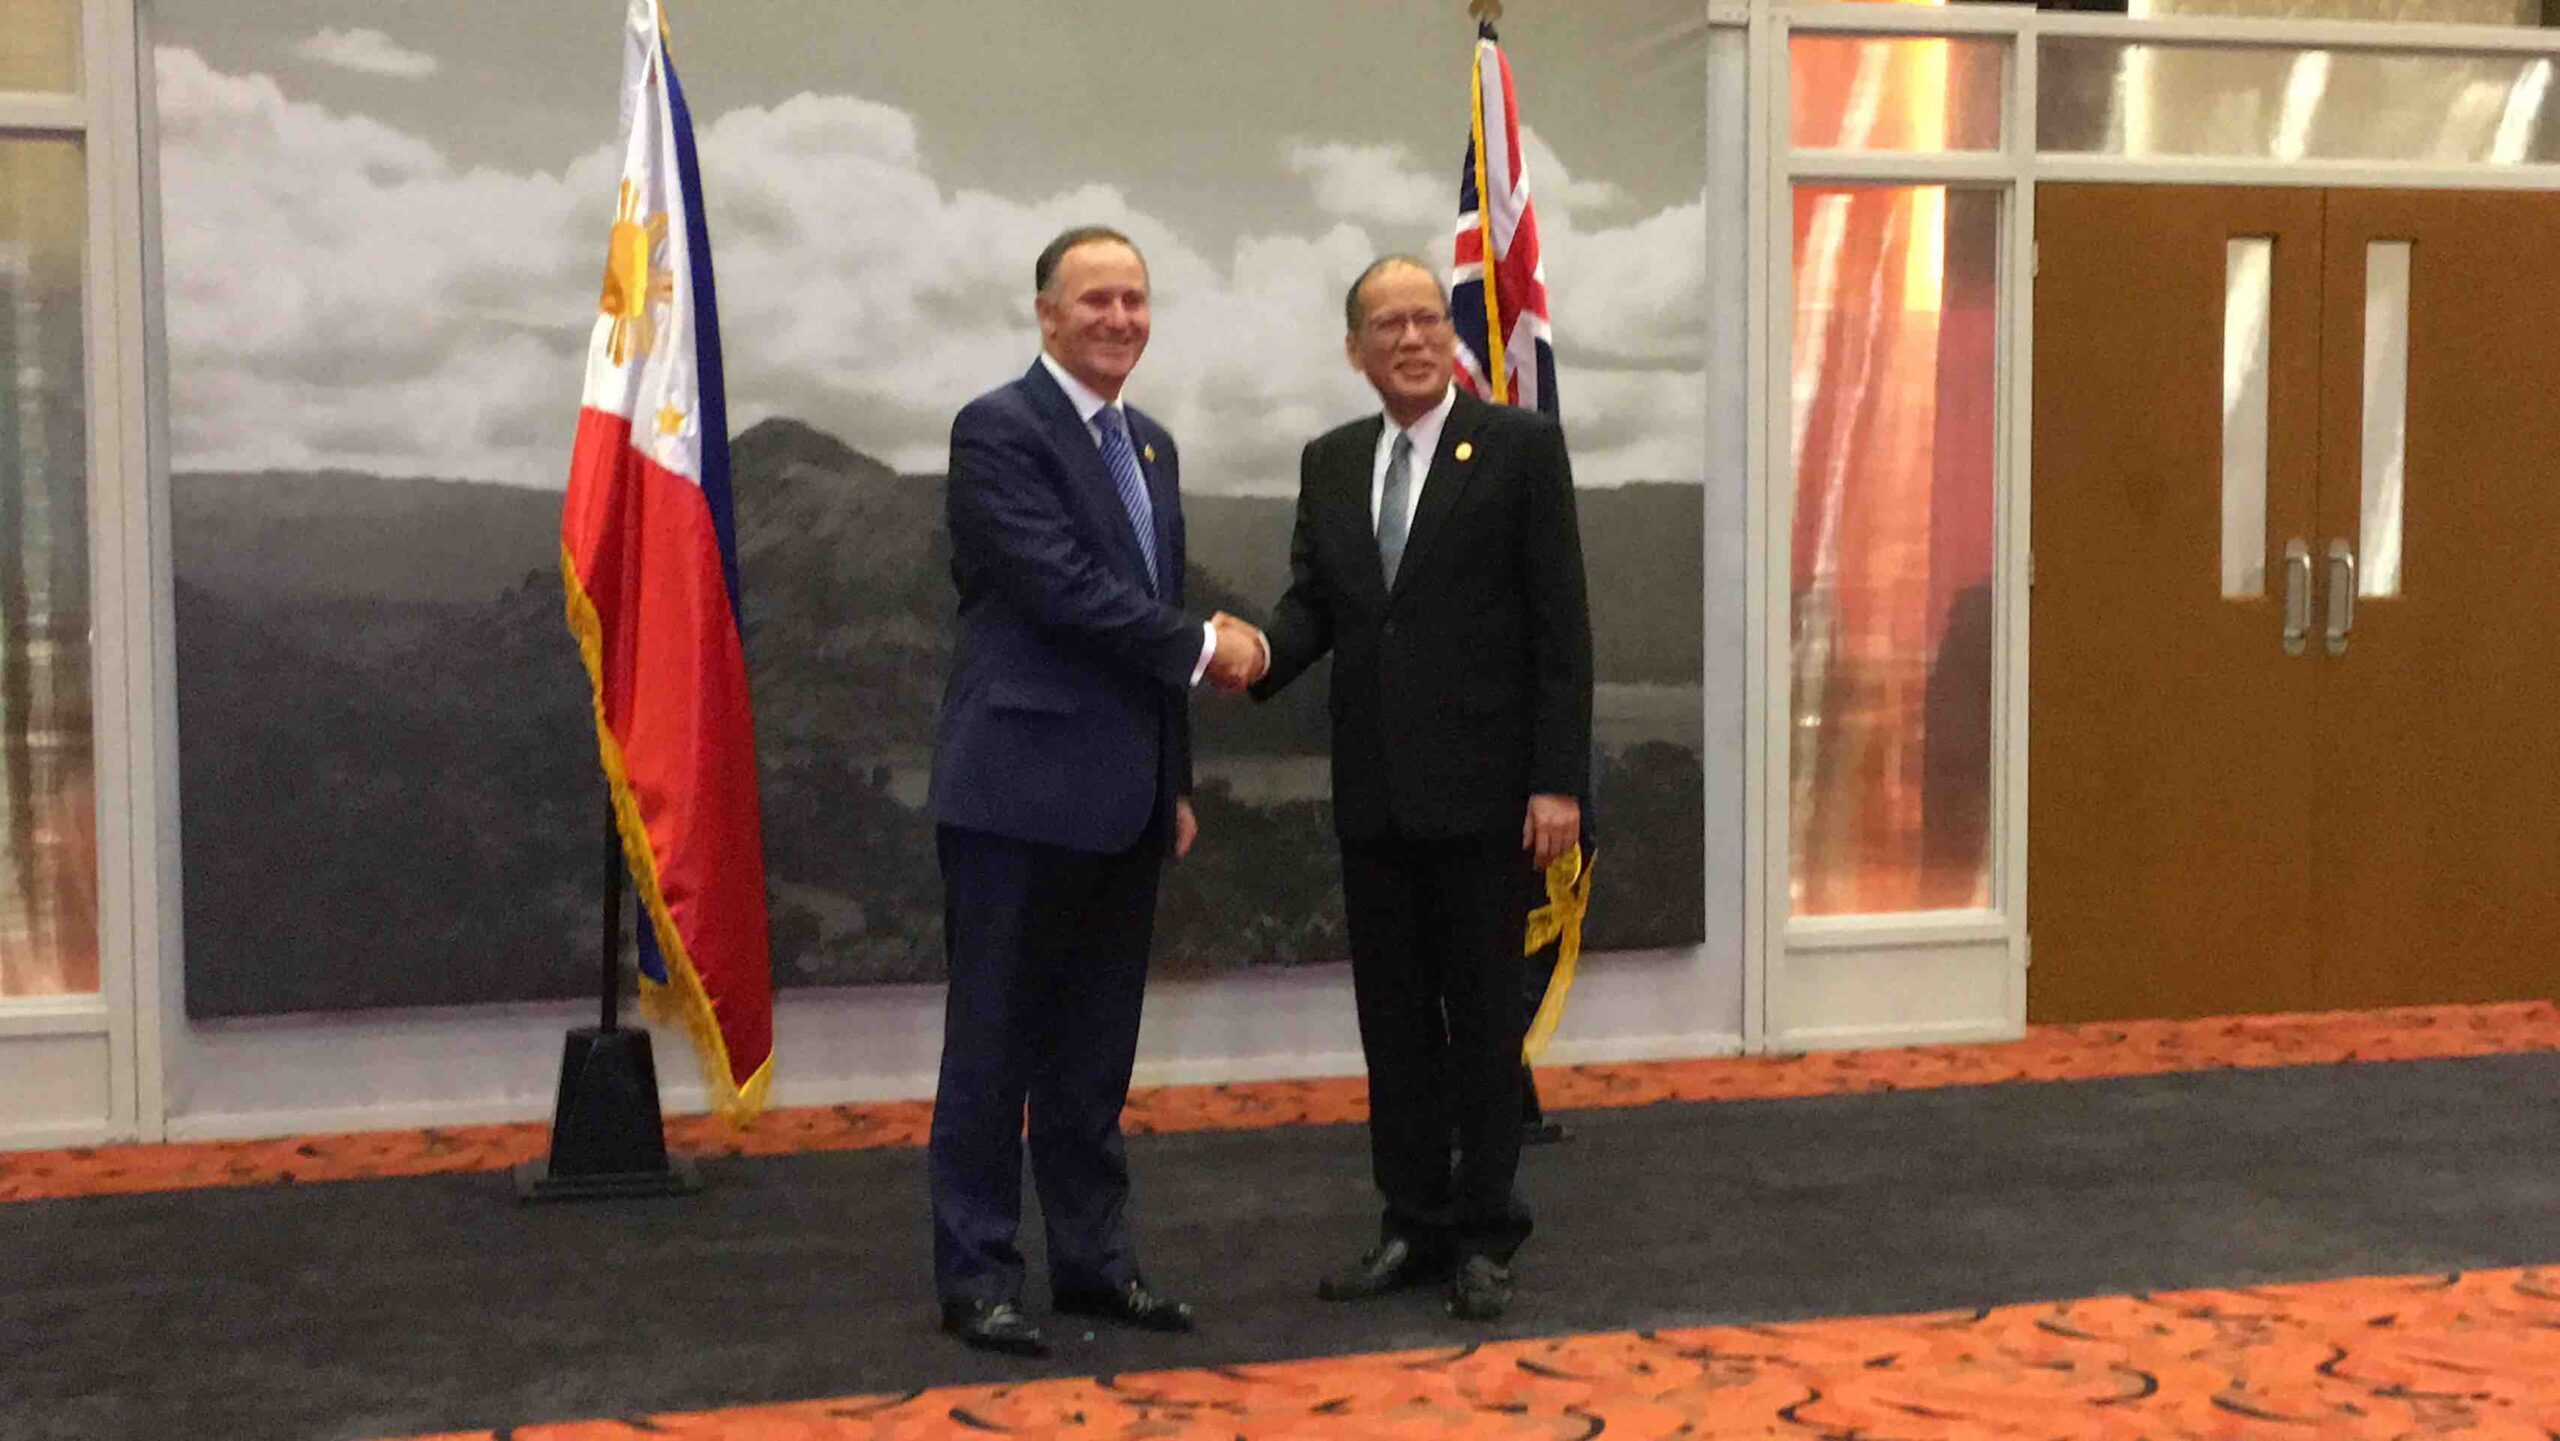 PH seeks to expand economic cooperation with New Zealand